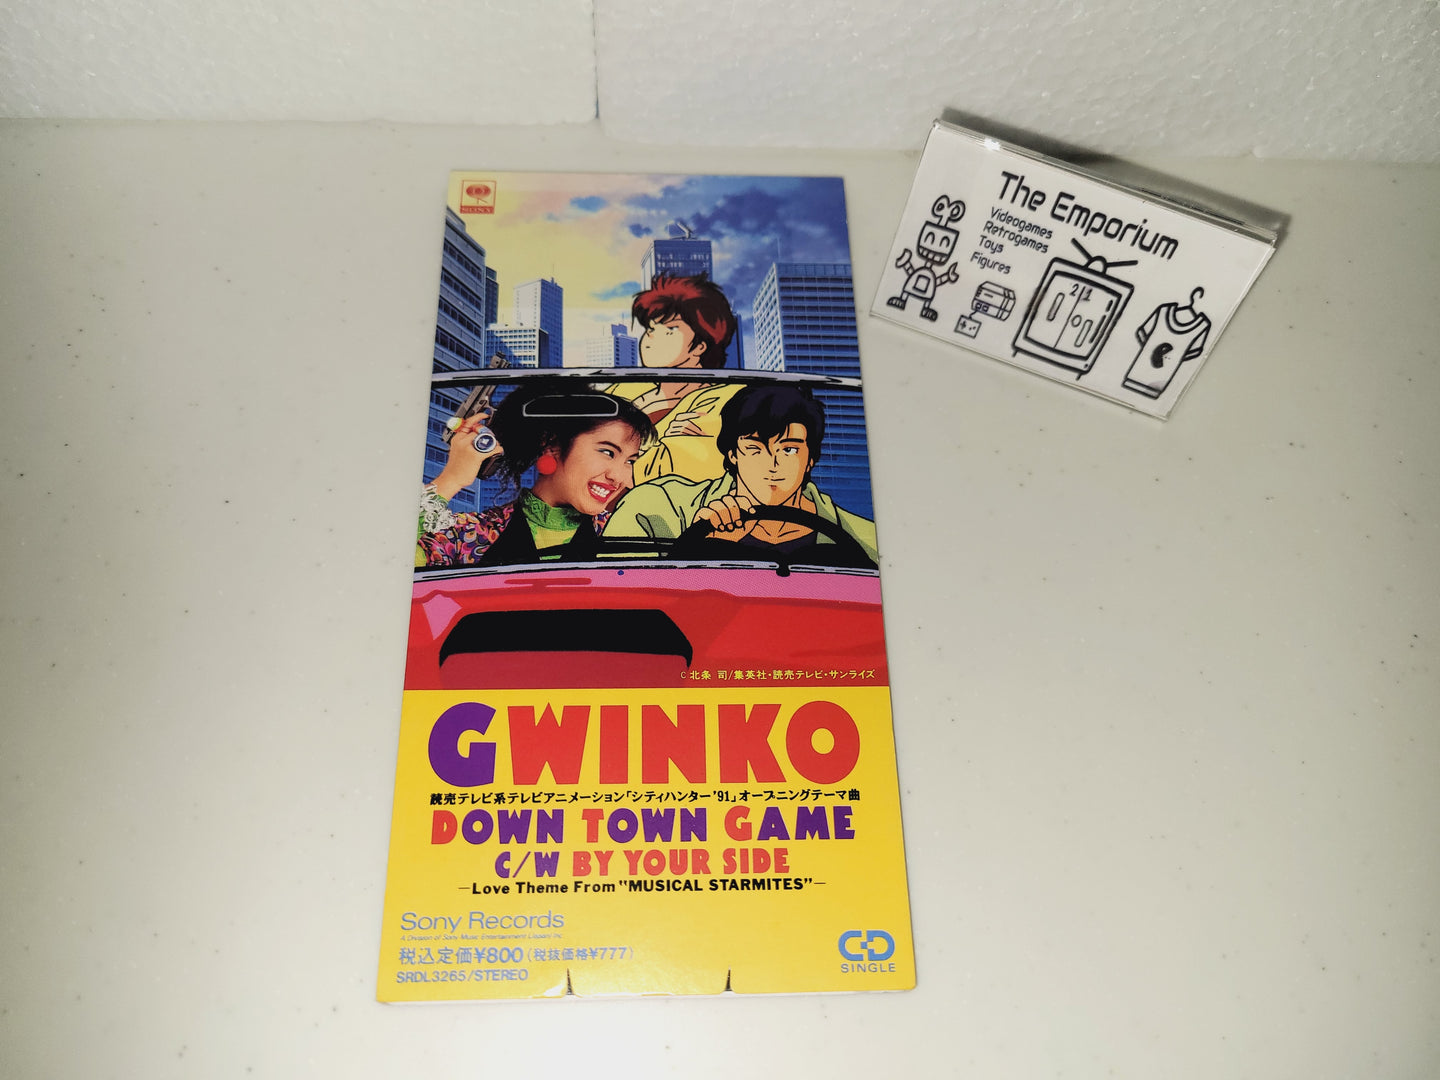 Down Town Game / GWINKO - Music cd soundtrack